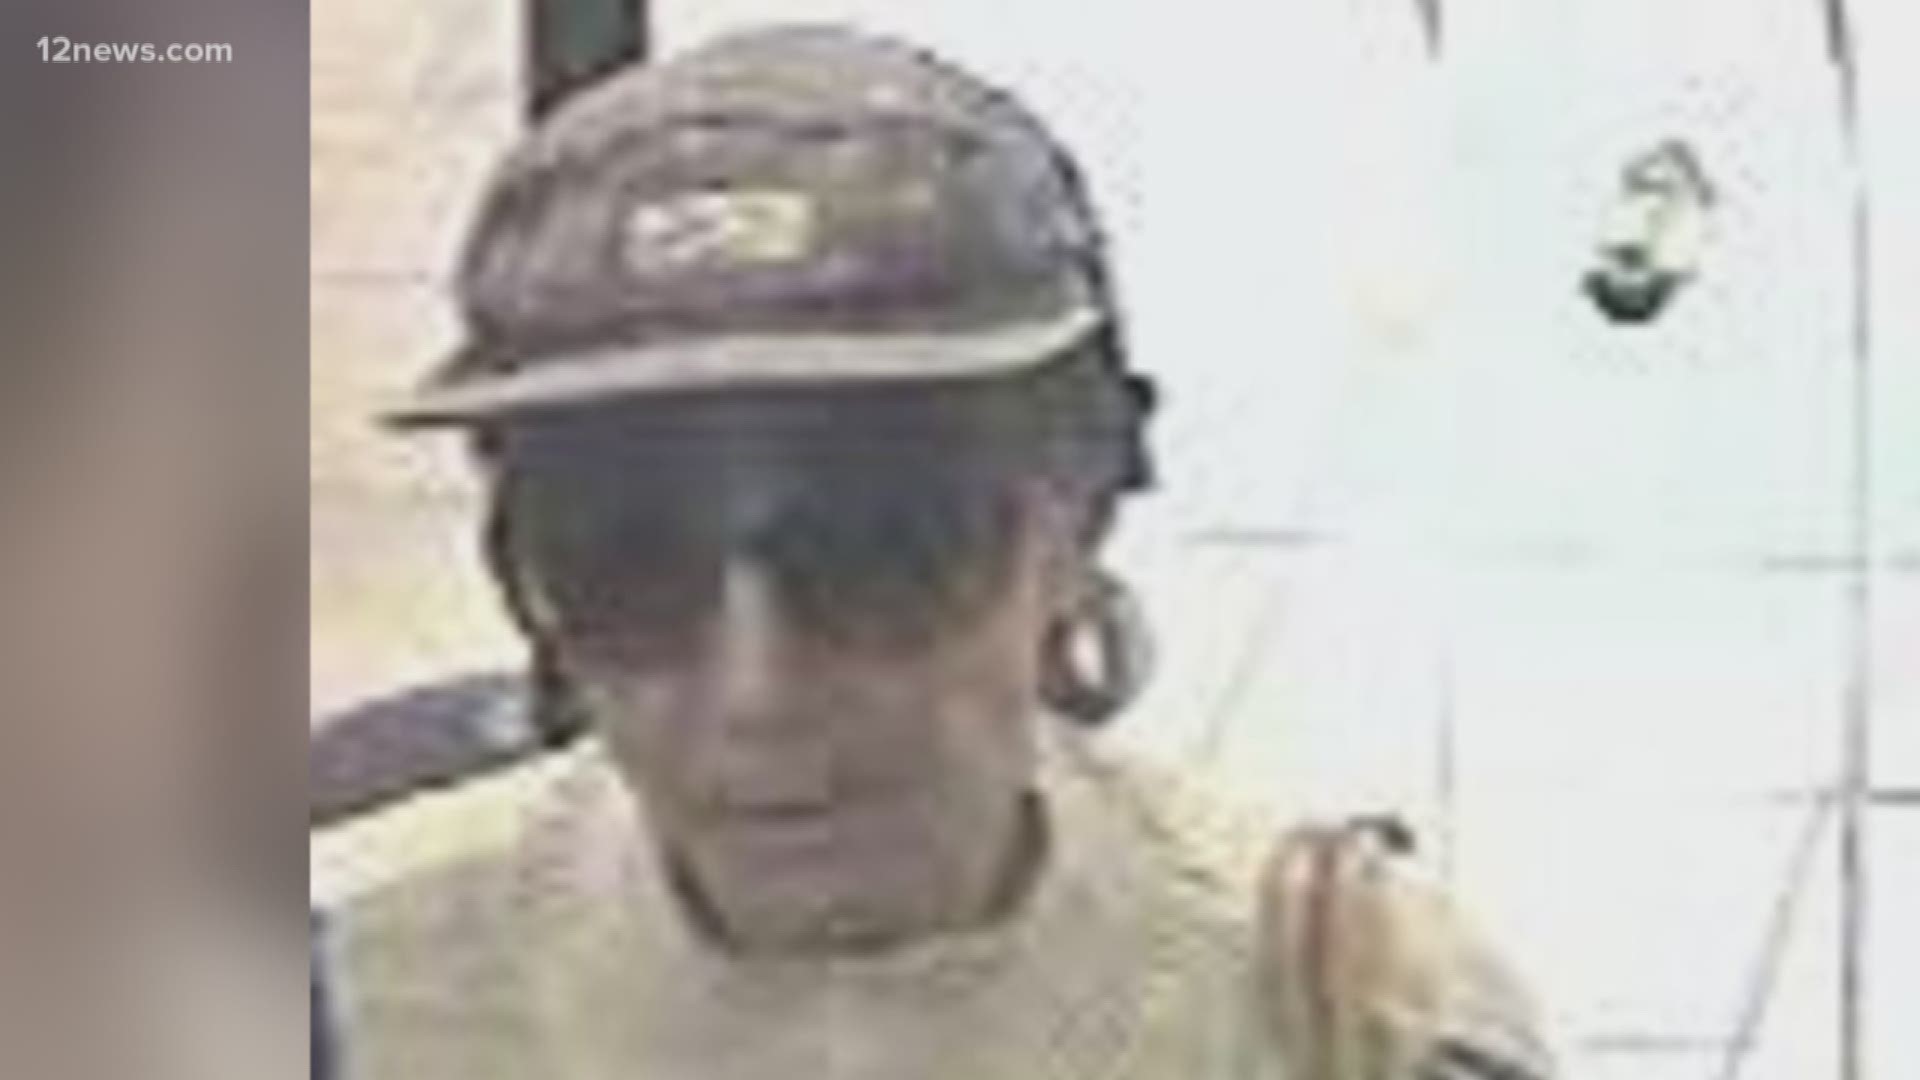 The FBI has dubbed her the "biddy bandit" because she's an older woman who is an annoying serial bank robber in the Valley. She is 5'5", between 115 and 130 pounds, between 50 and 60 years old.